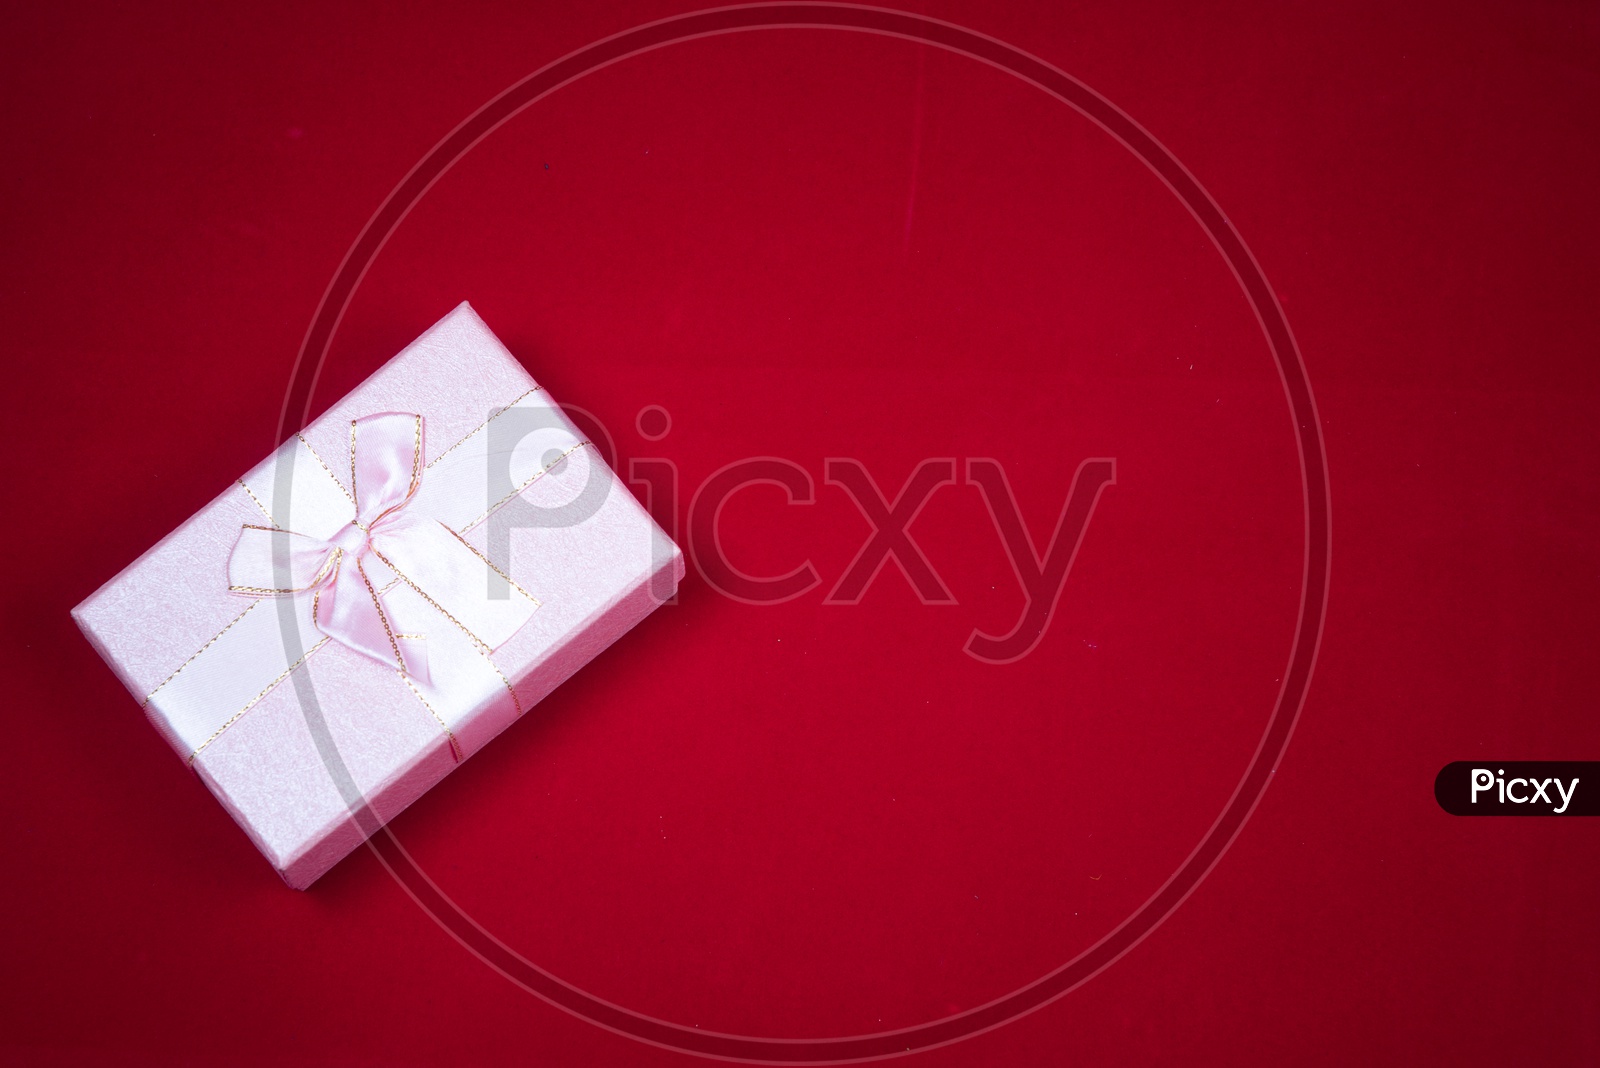 Gift Box On Isolated Red background with Space